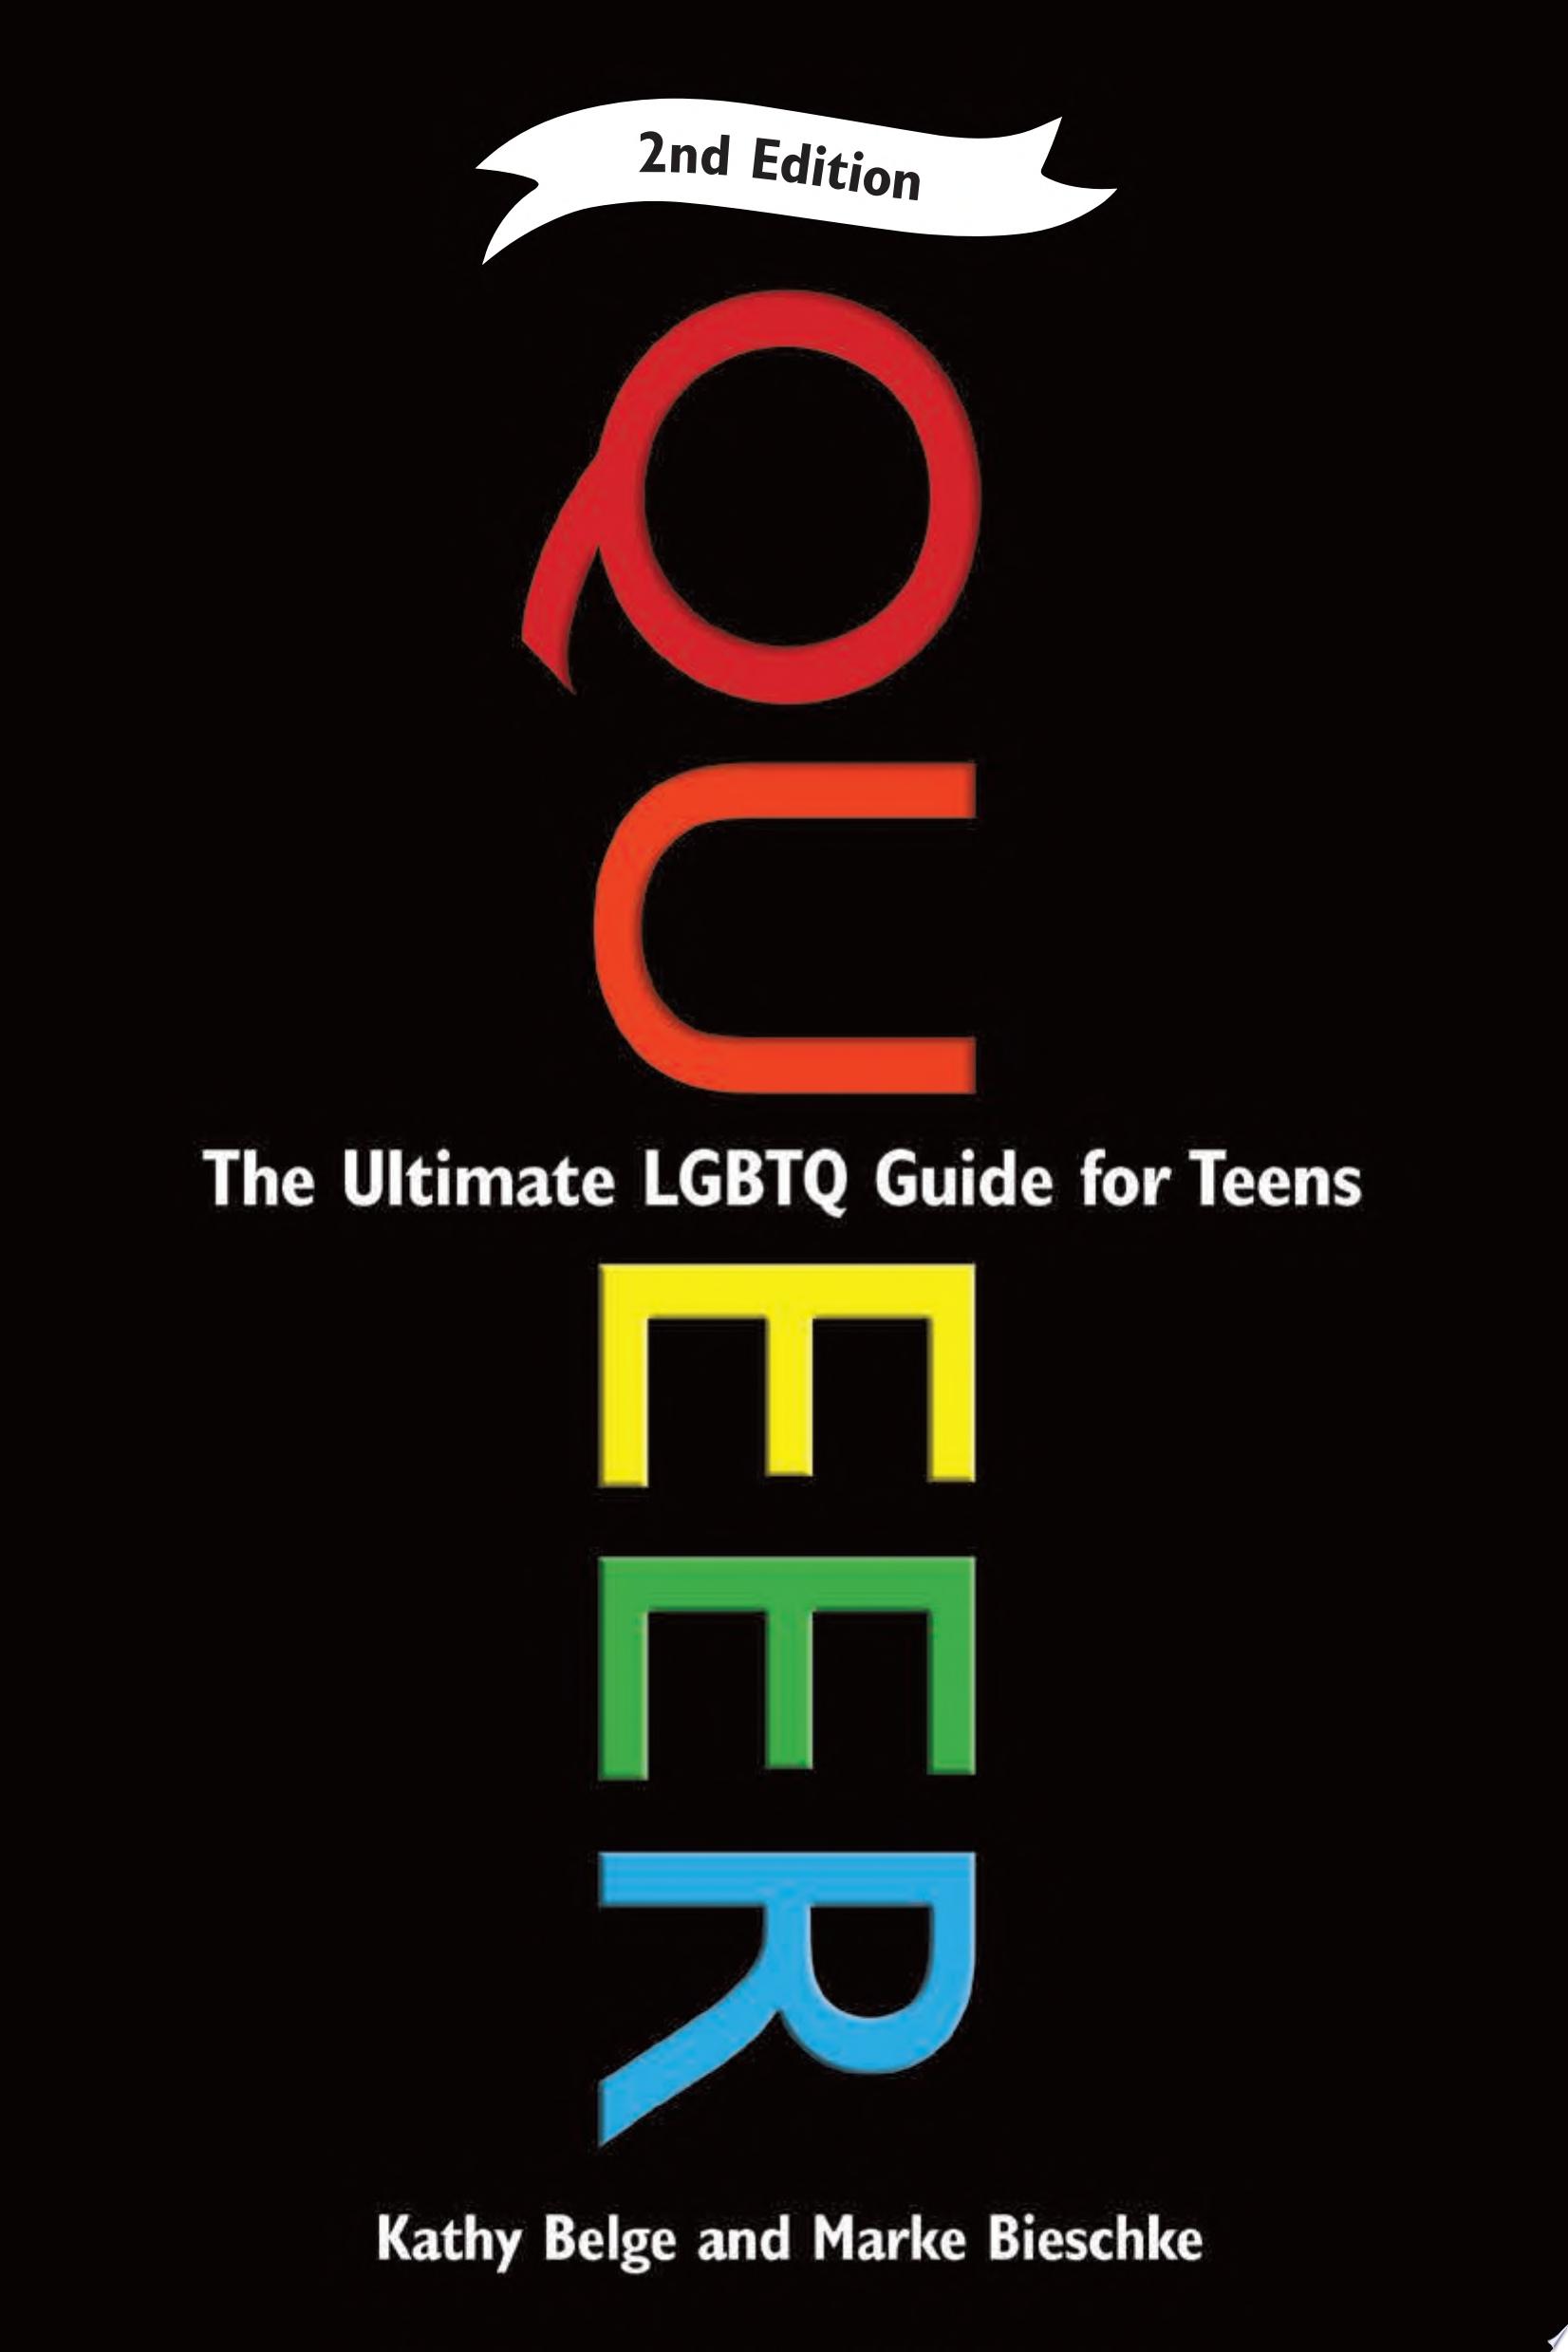 Image for "Queer"